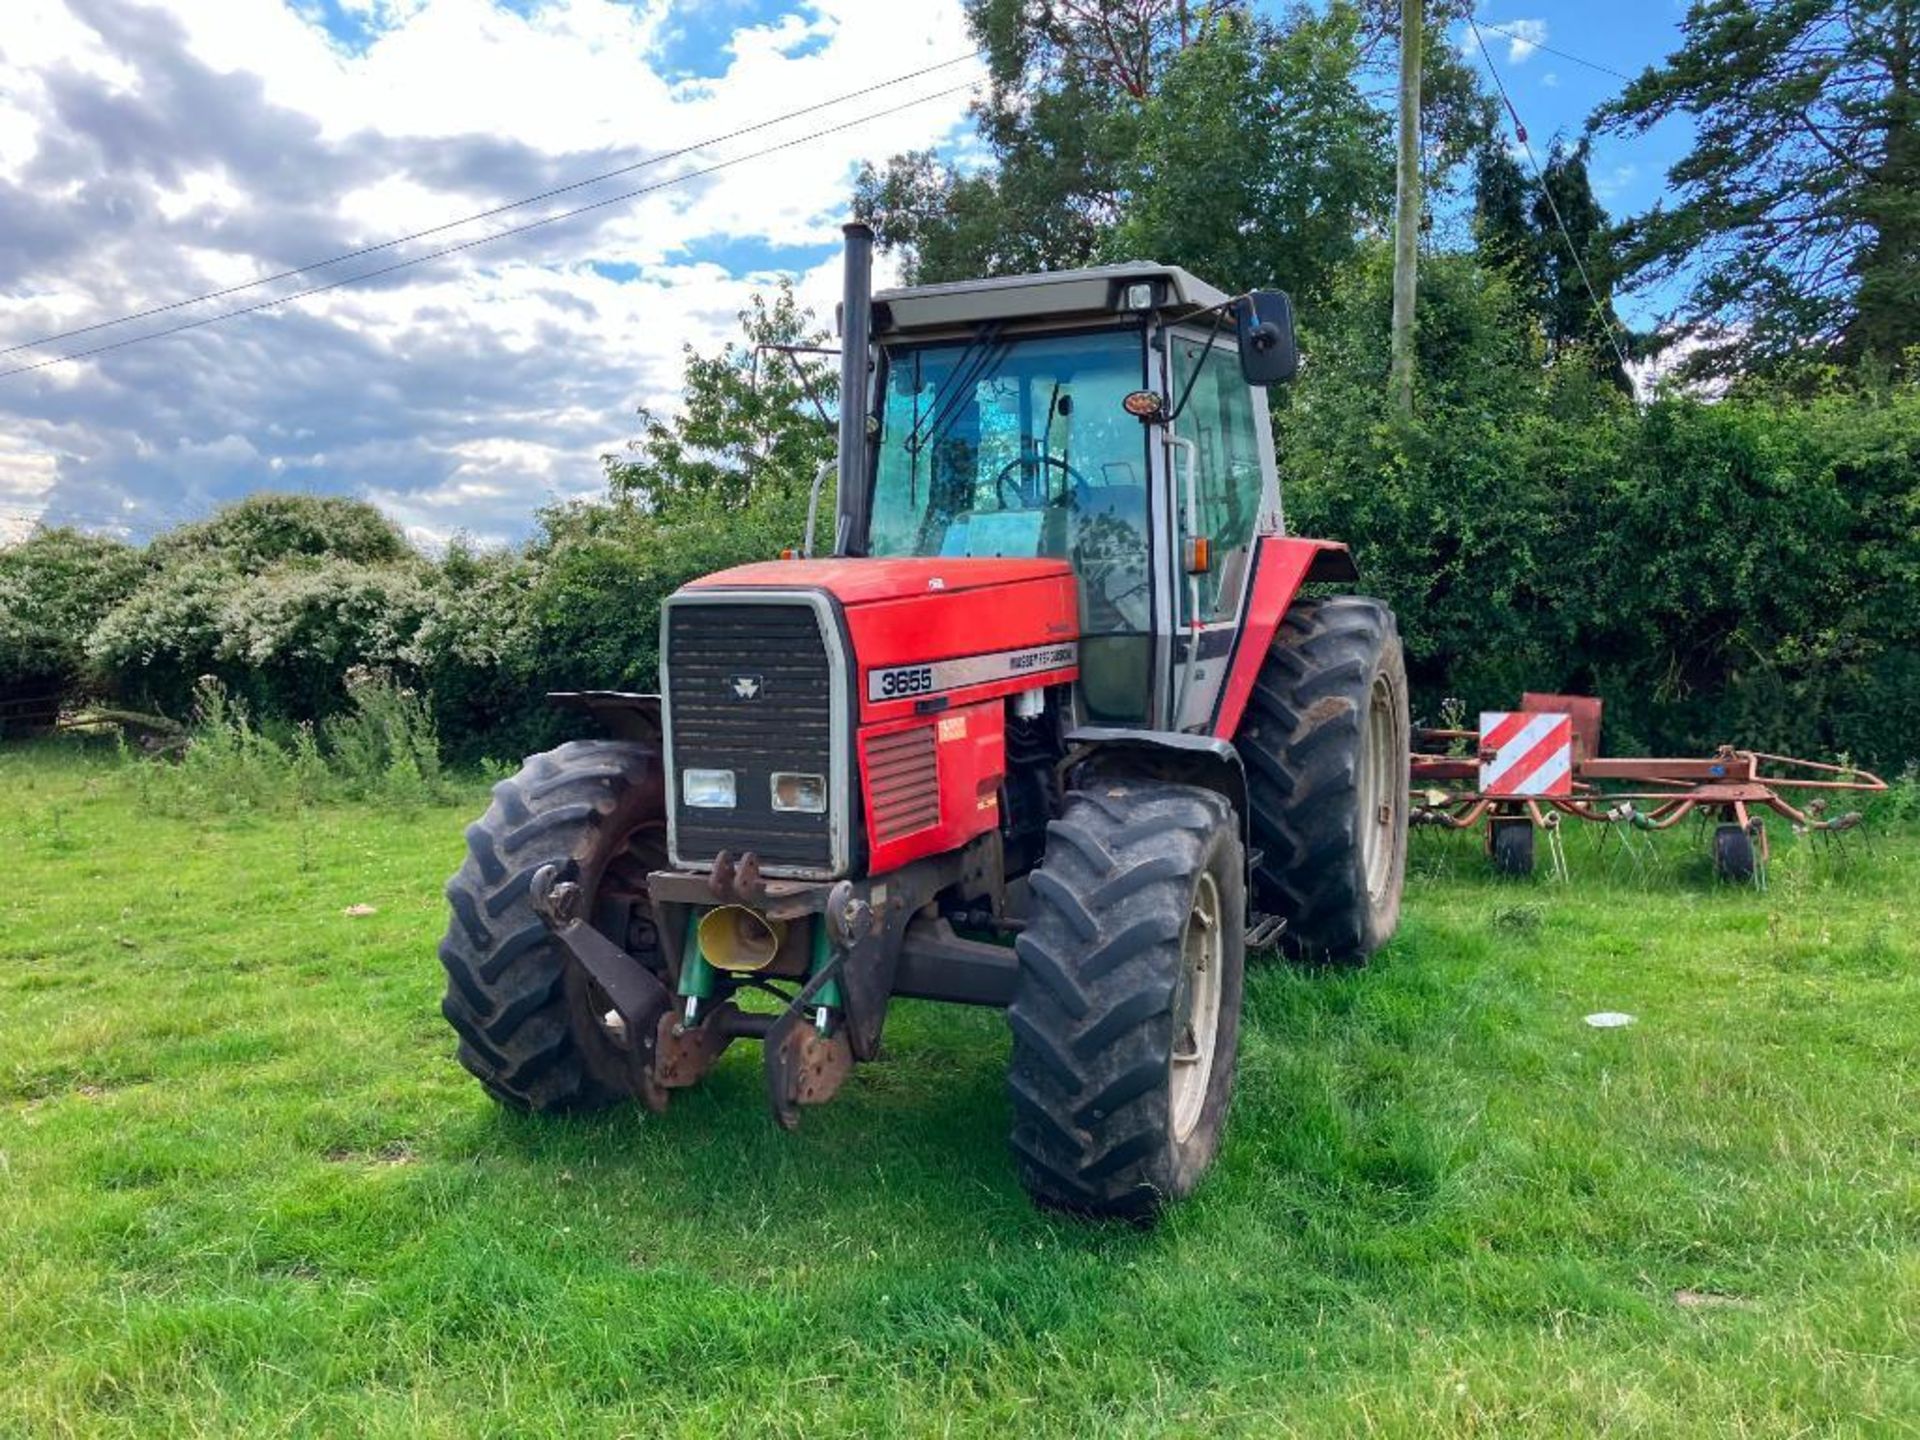 1995 Massey Ferguson 3655 Dynashift 4wd Datatronic tractor with 3 manual spools, front linkage and P - Image 15 of 23